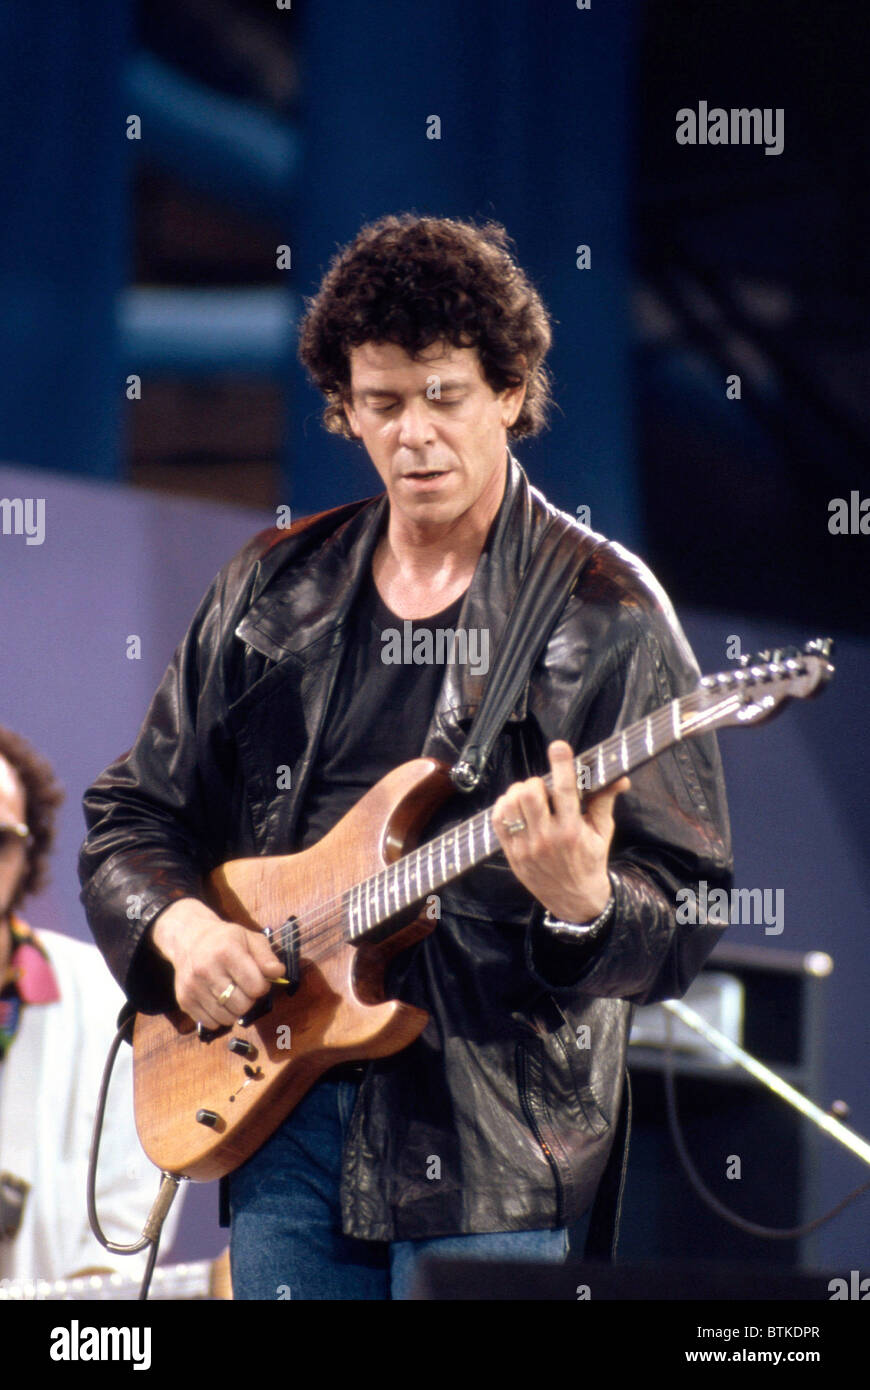 Lou Reed at the concert for  Amnesty International, Giant Stadium, New Jersey, June 15, 1986, Stock Photo